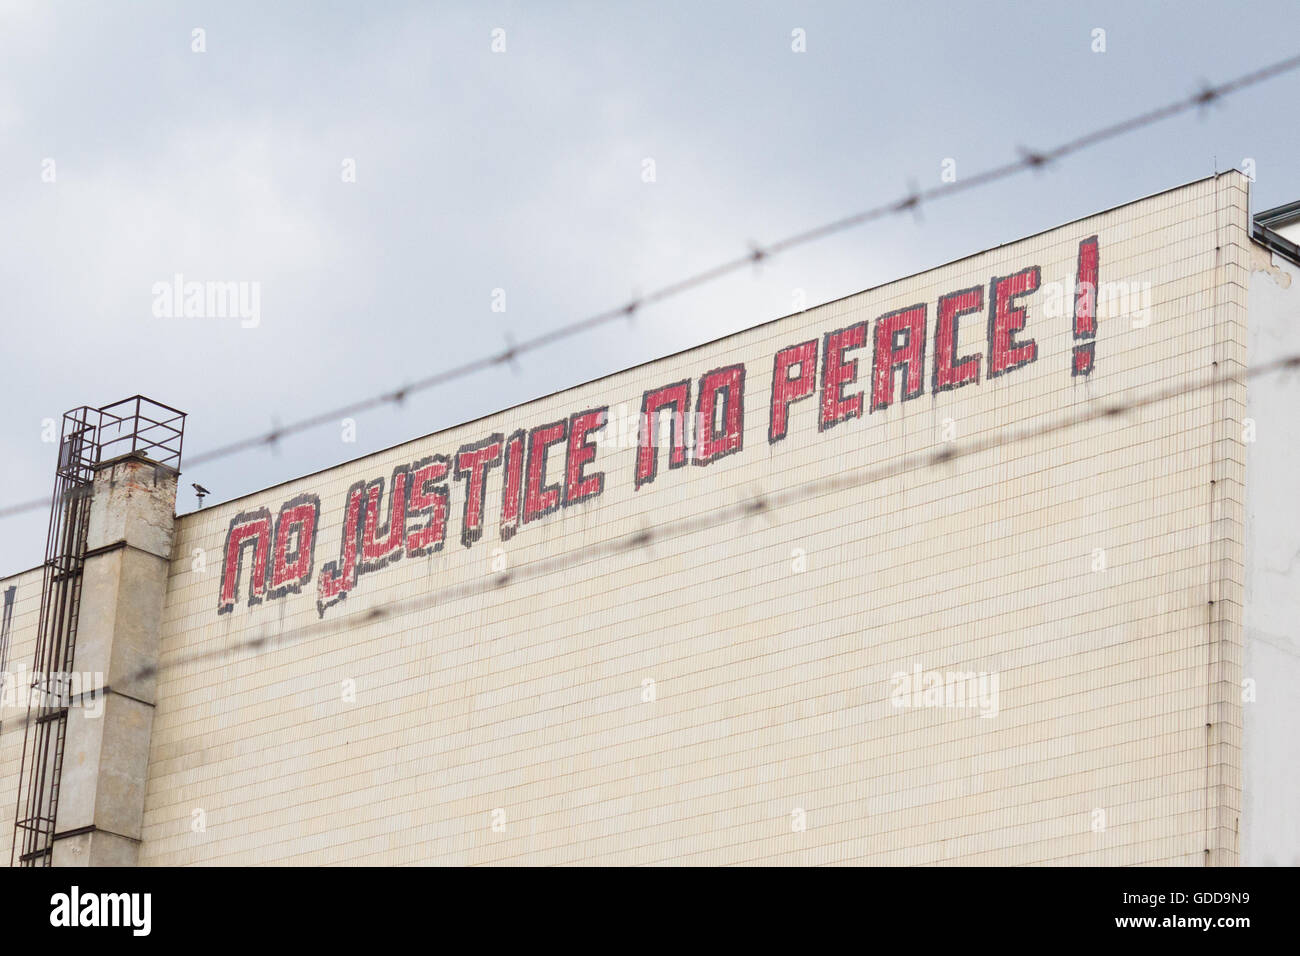 No justice, no peace graffiti on building in Berlin, Germany. Stock Photo